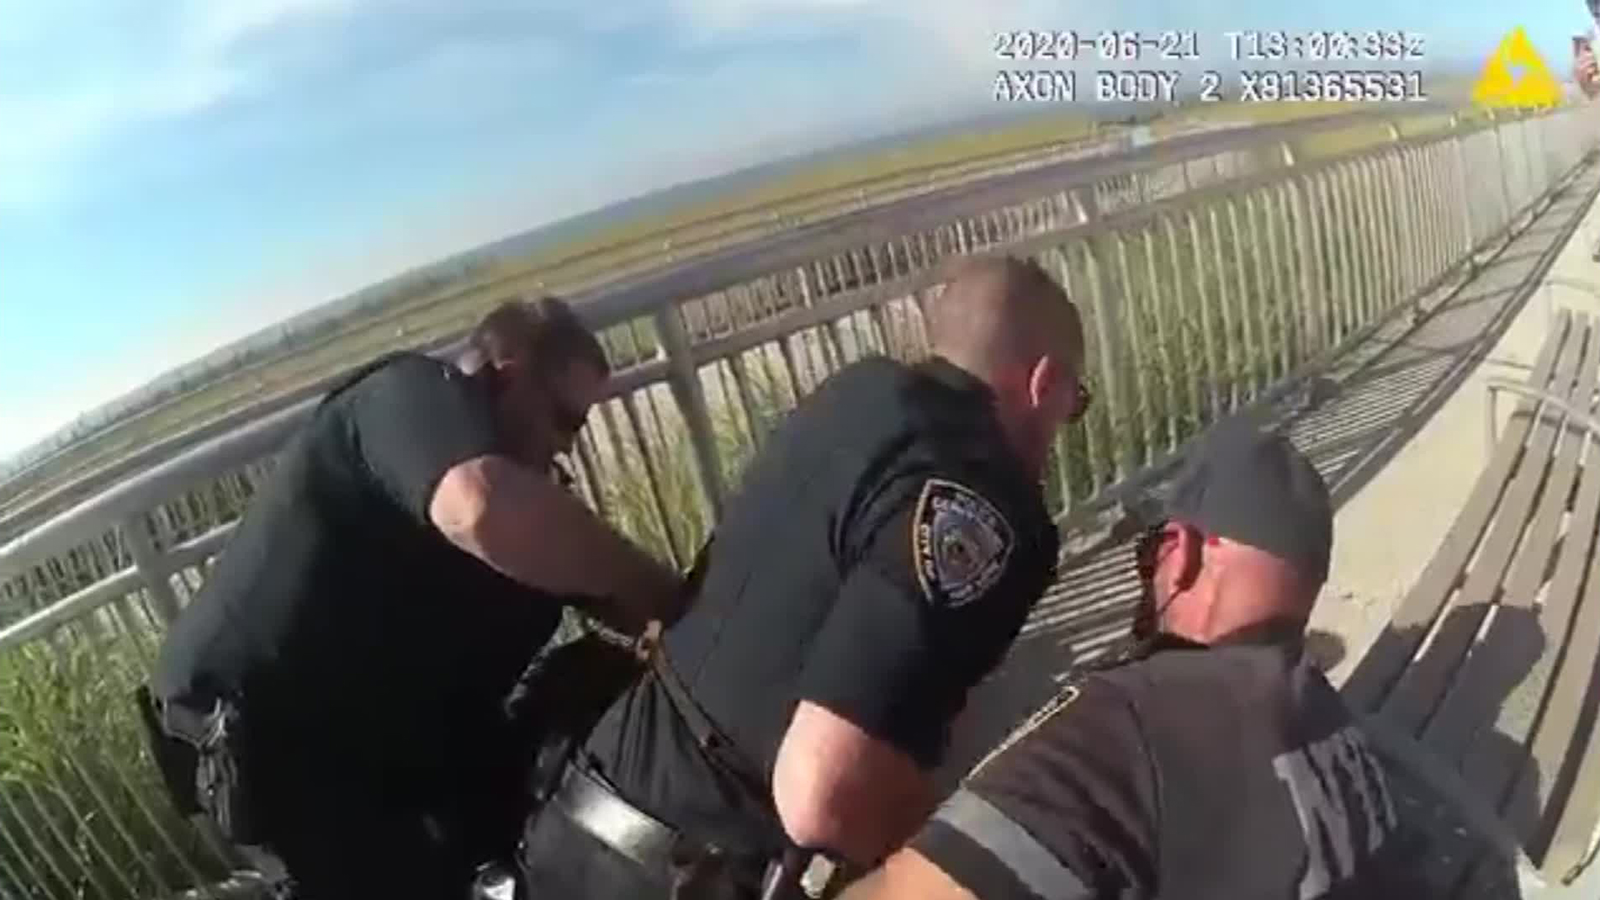 The video shows several officers arresting a man, with one officer appearing to put him in a chokehold. 